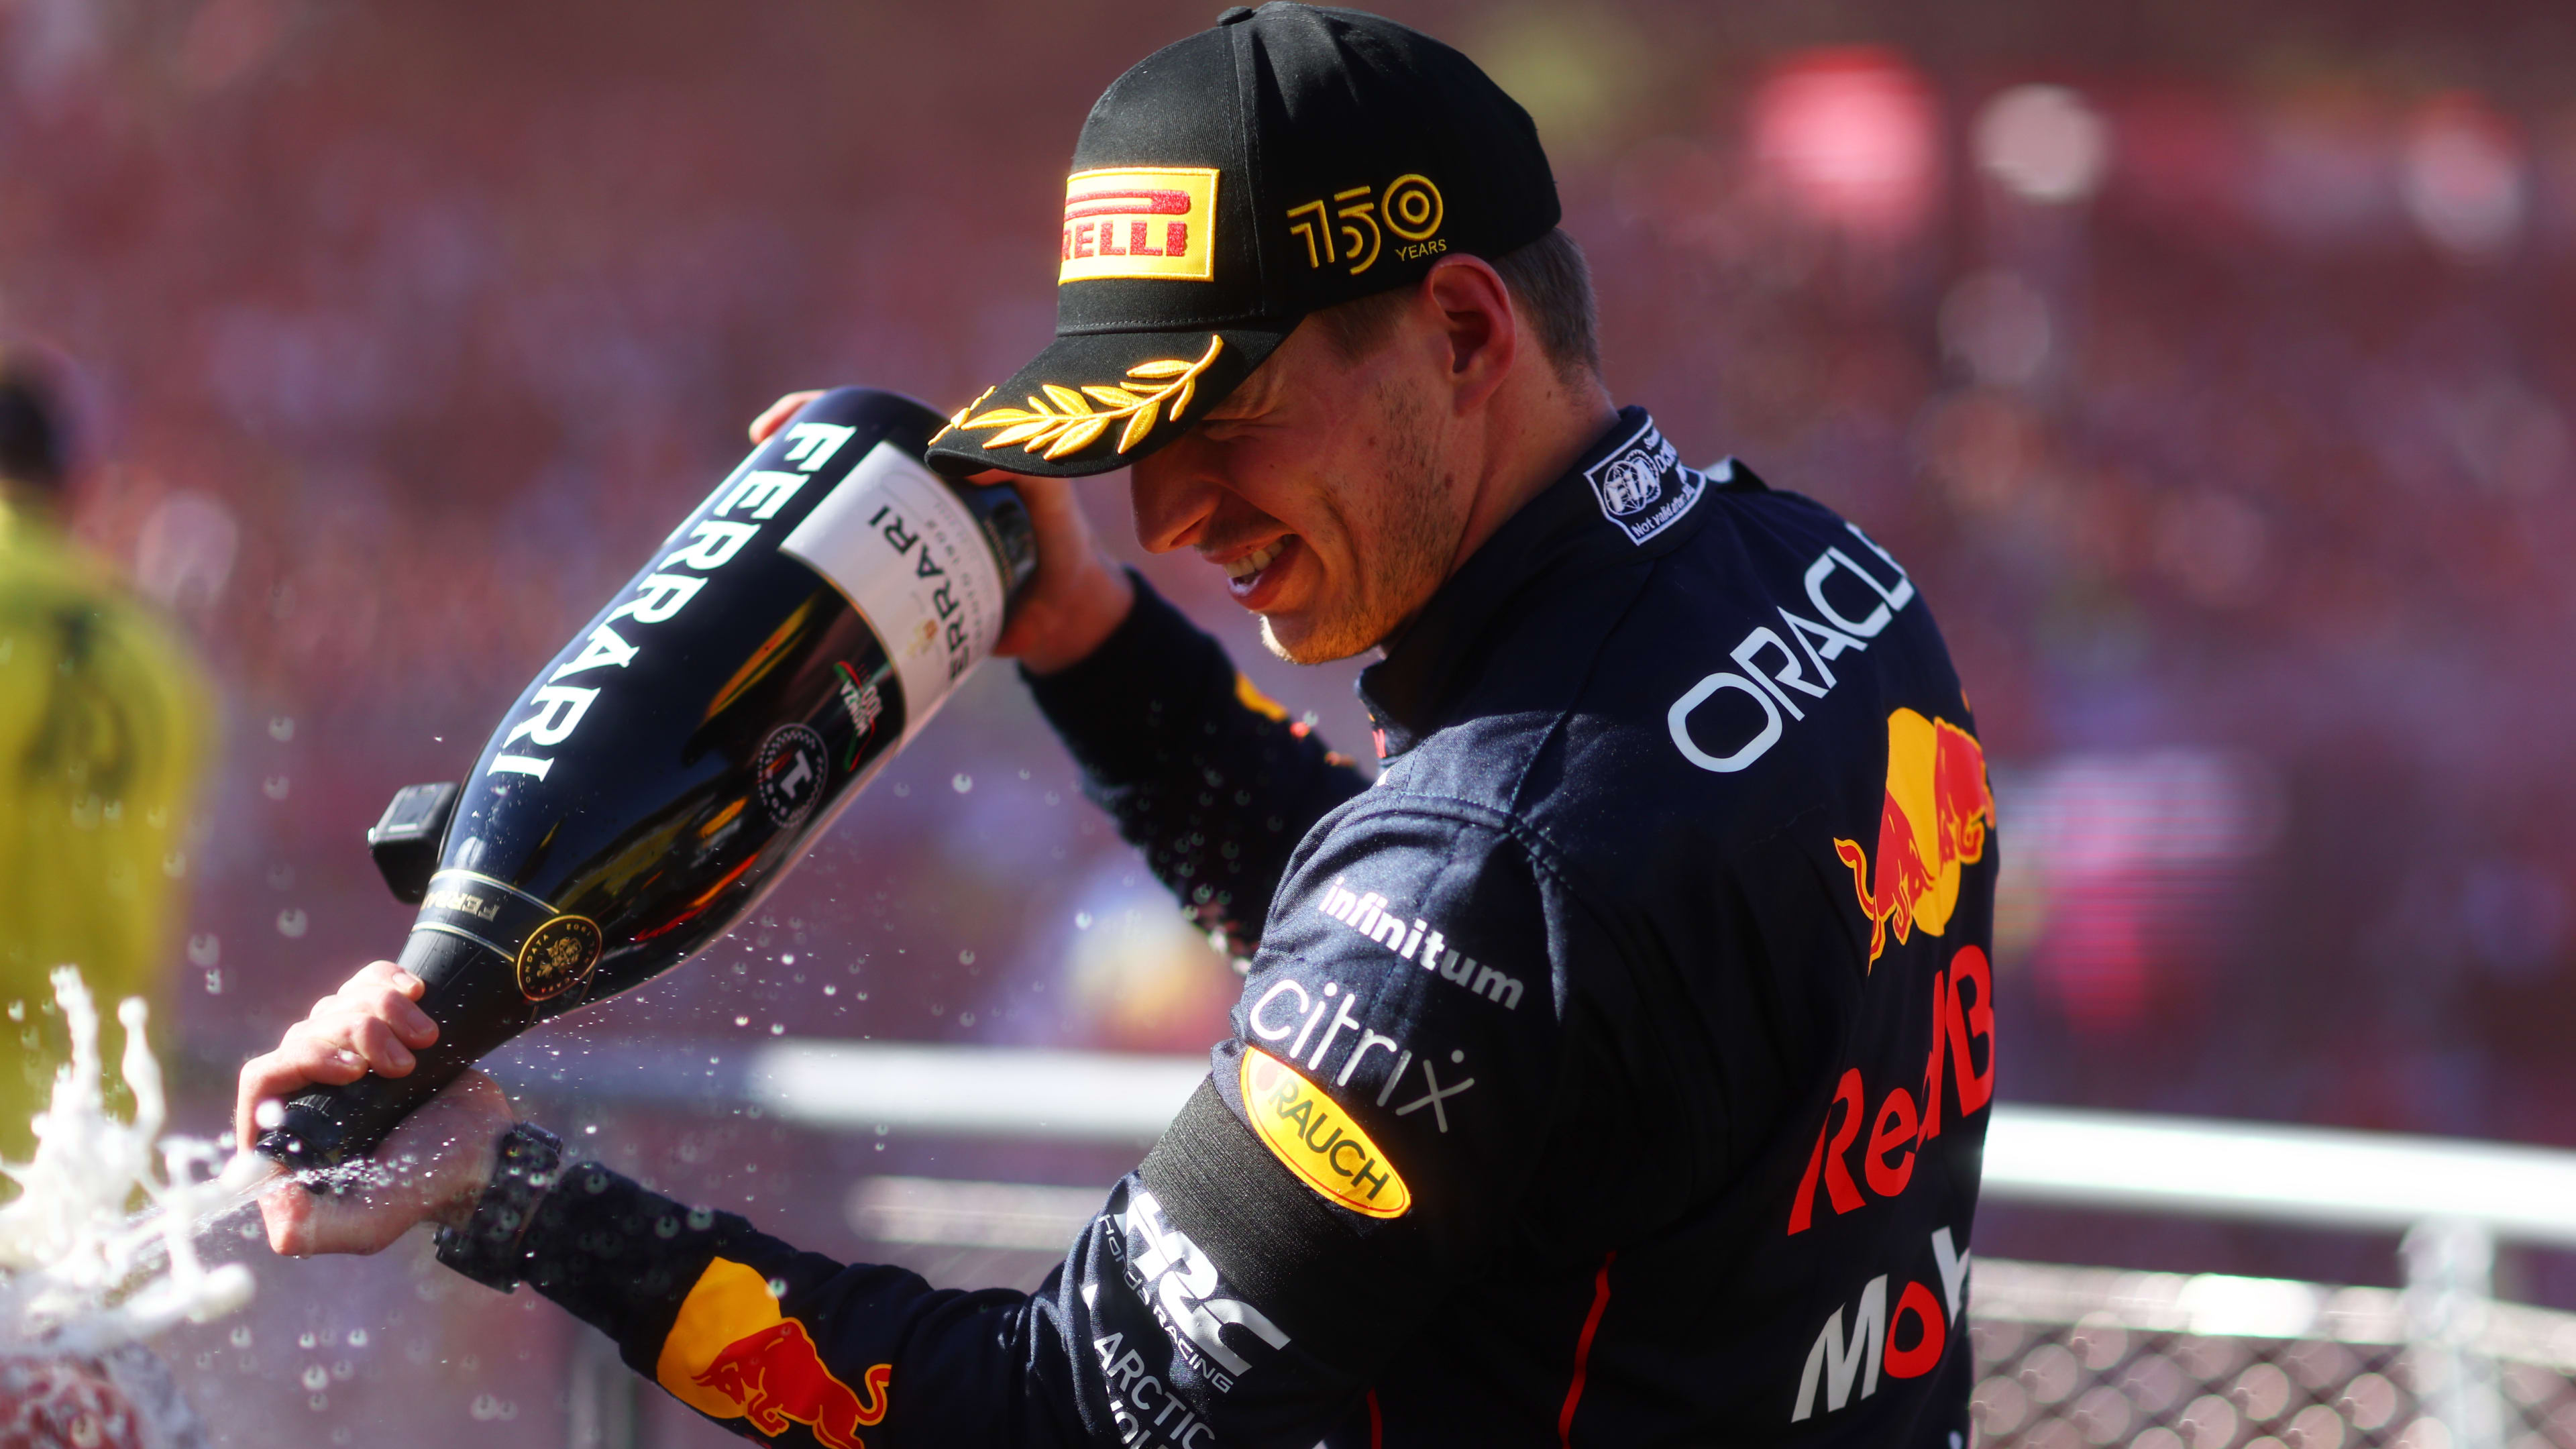 Verstappen says maiden Italian GP win continues an ‘amazing year’ as he edges closer to title | Formula 1®